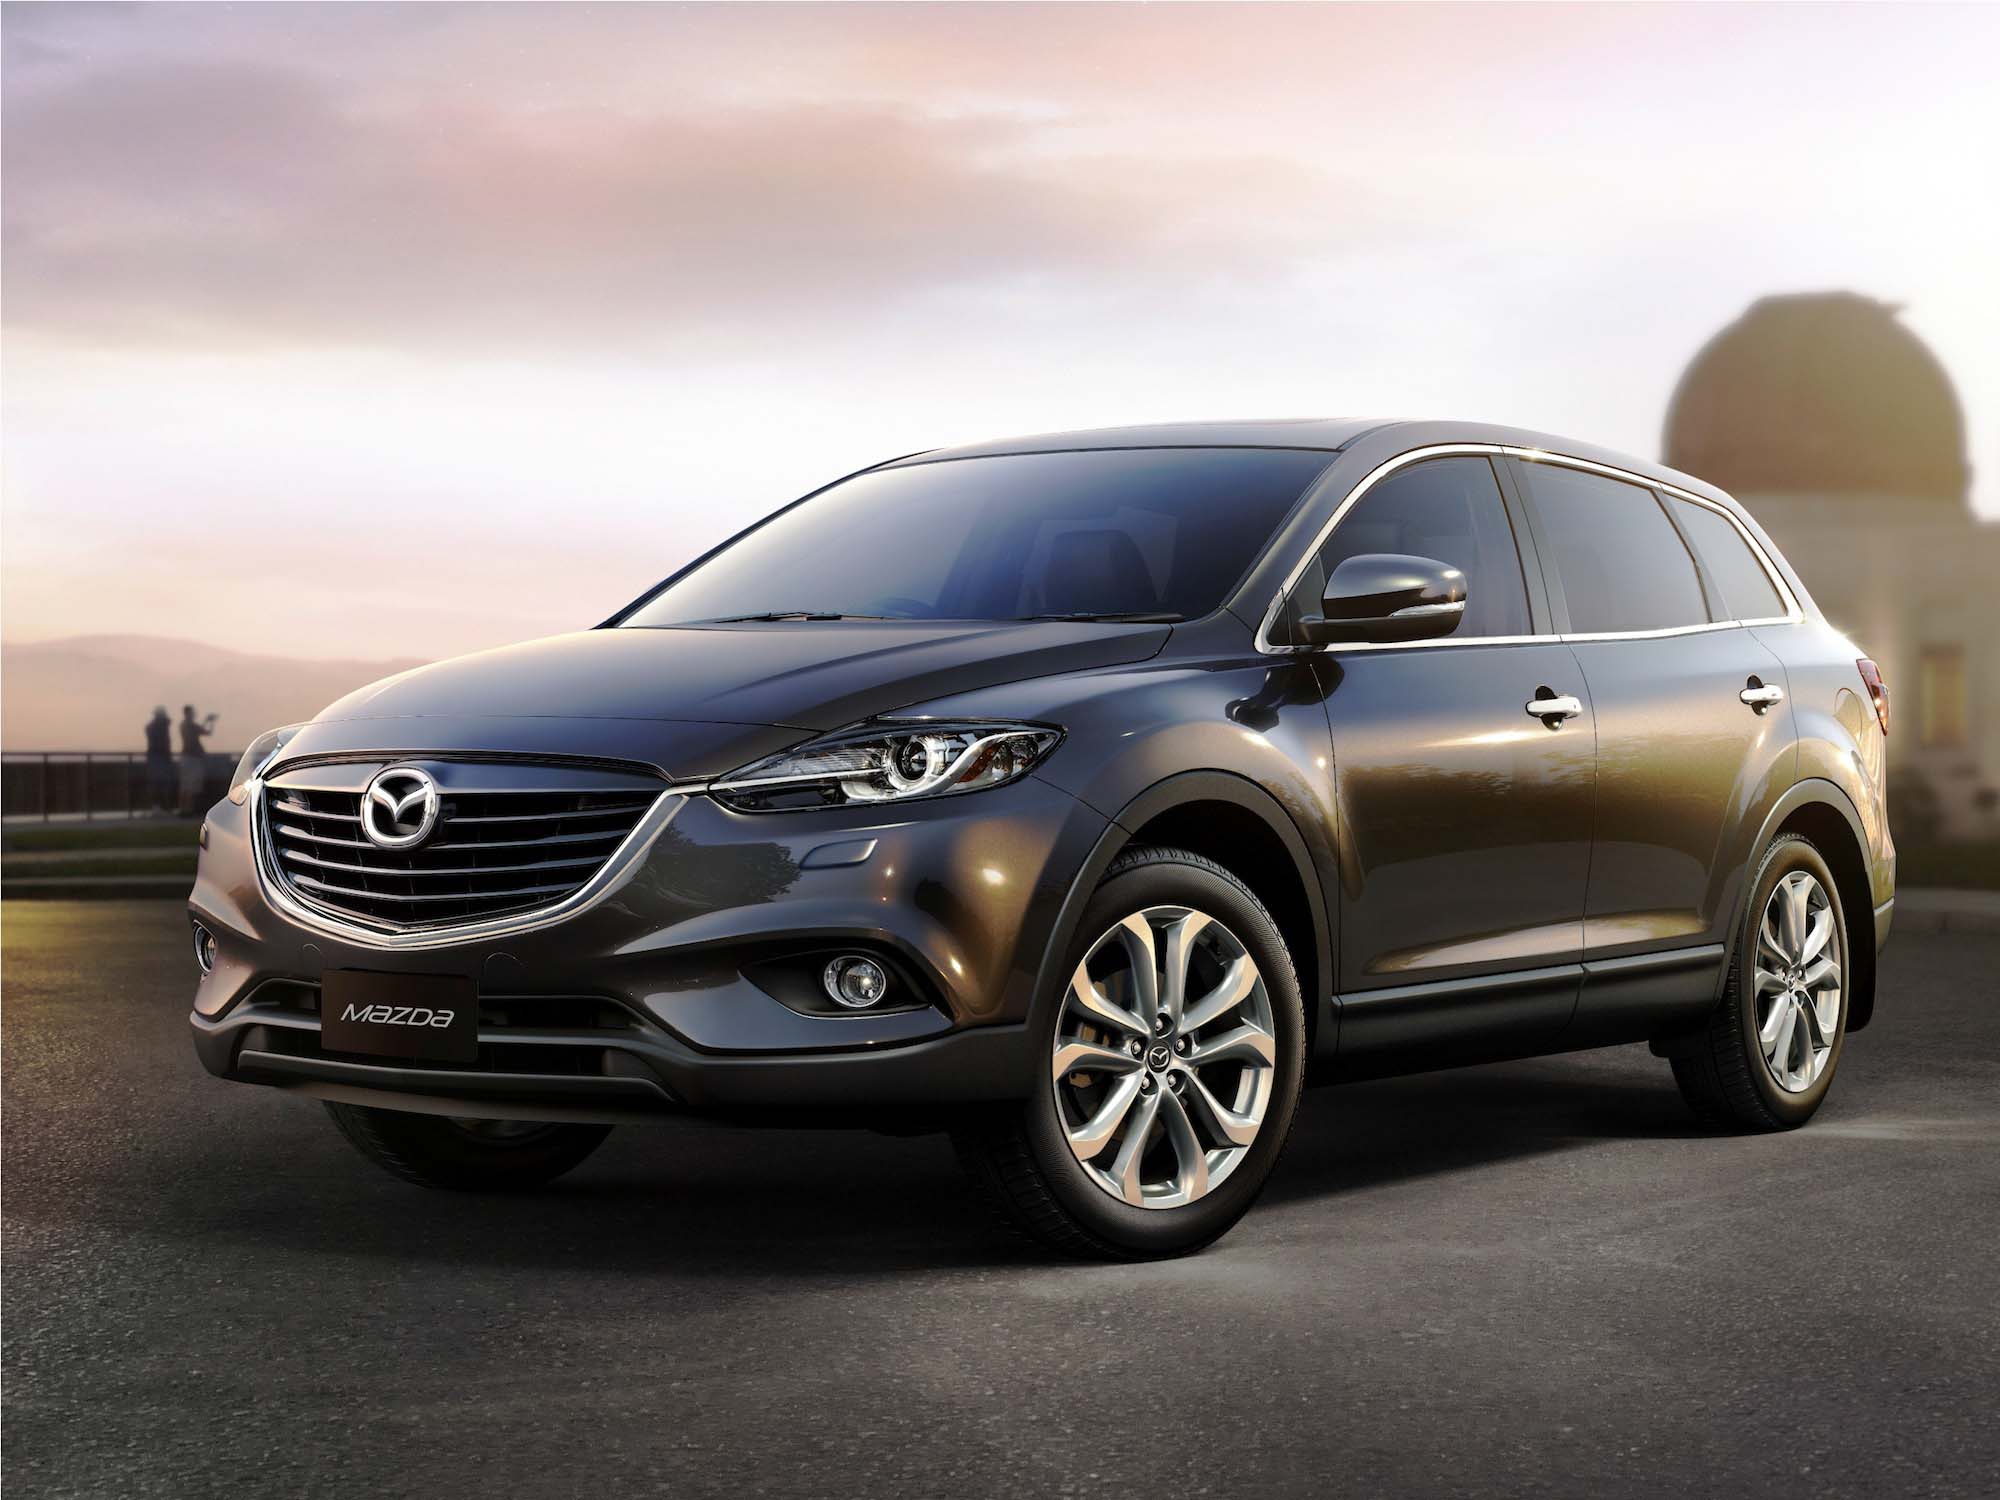 2016 Mazda CX9 7Passenger SUV review Car Awesome